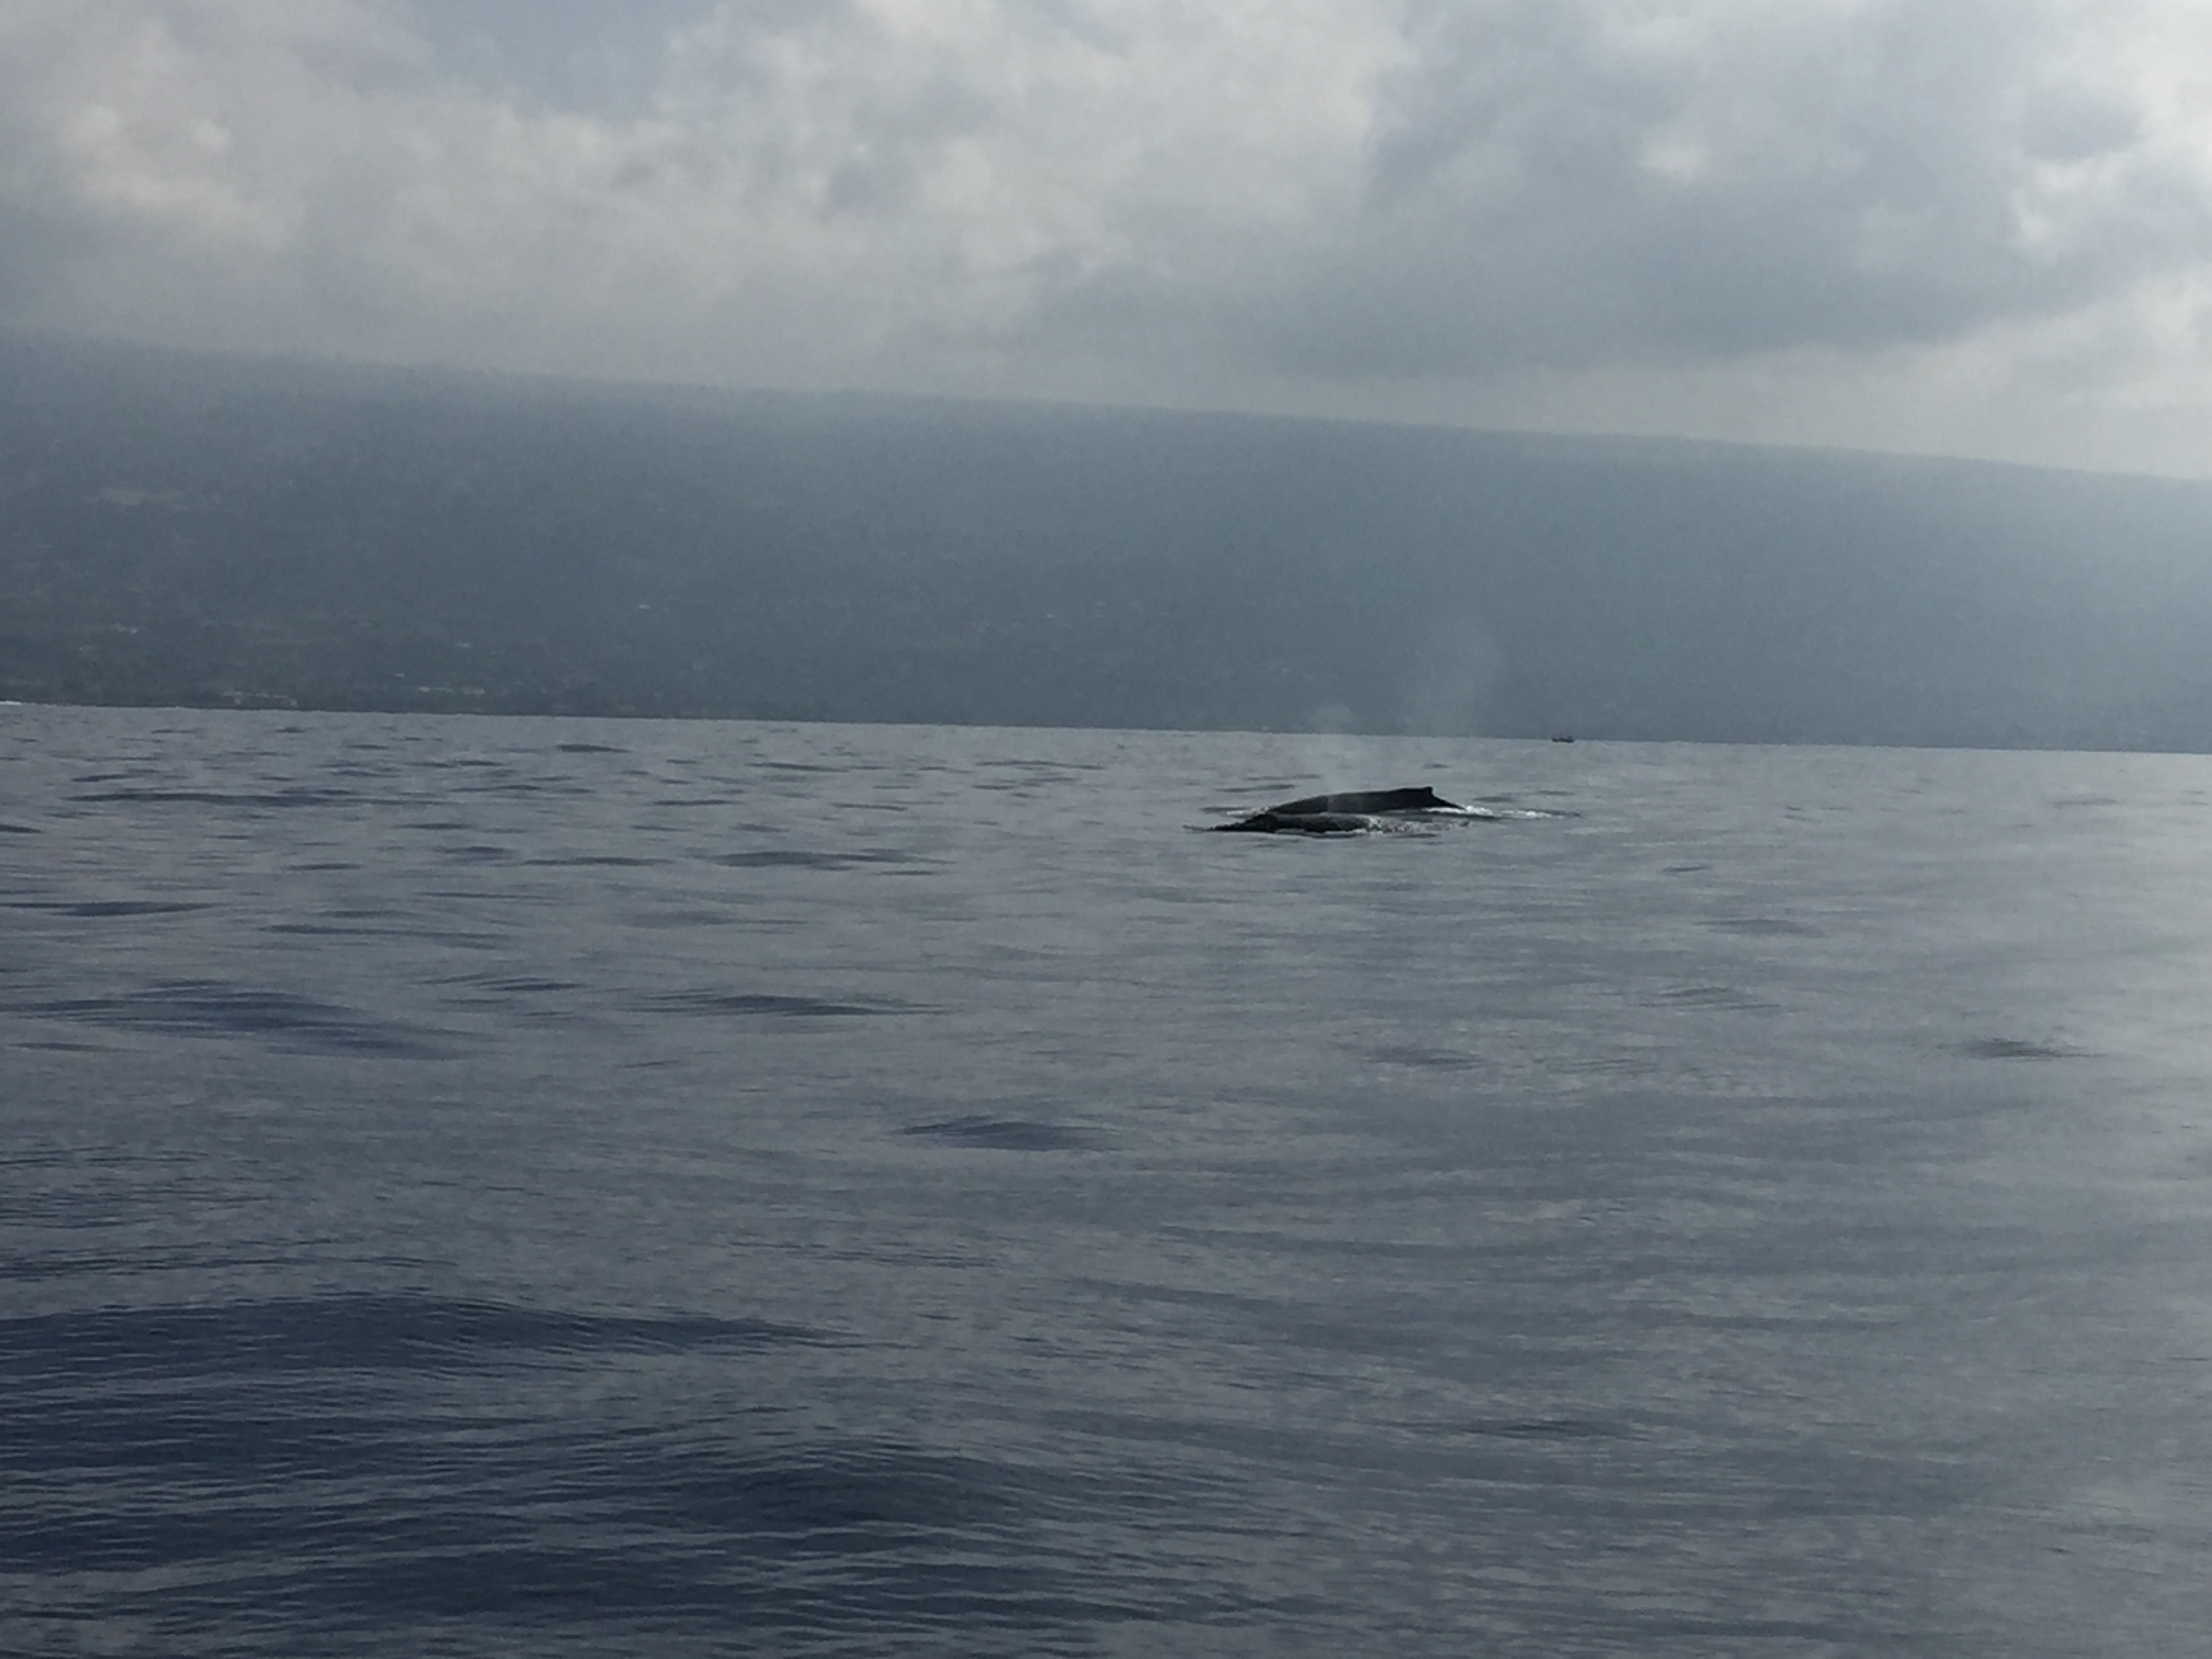 We saw several humpback whales, with bottle nose dolphins accompanying them